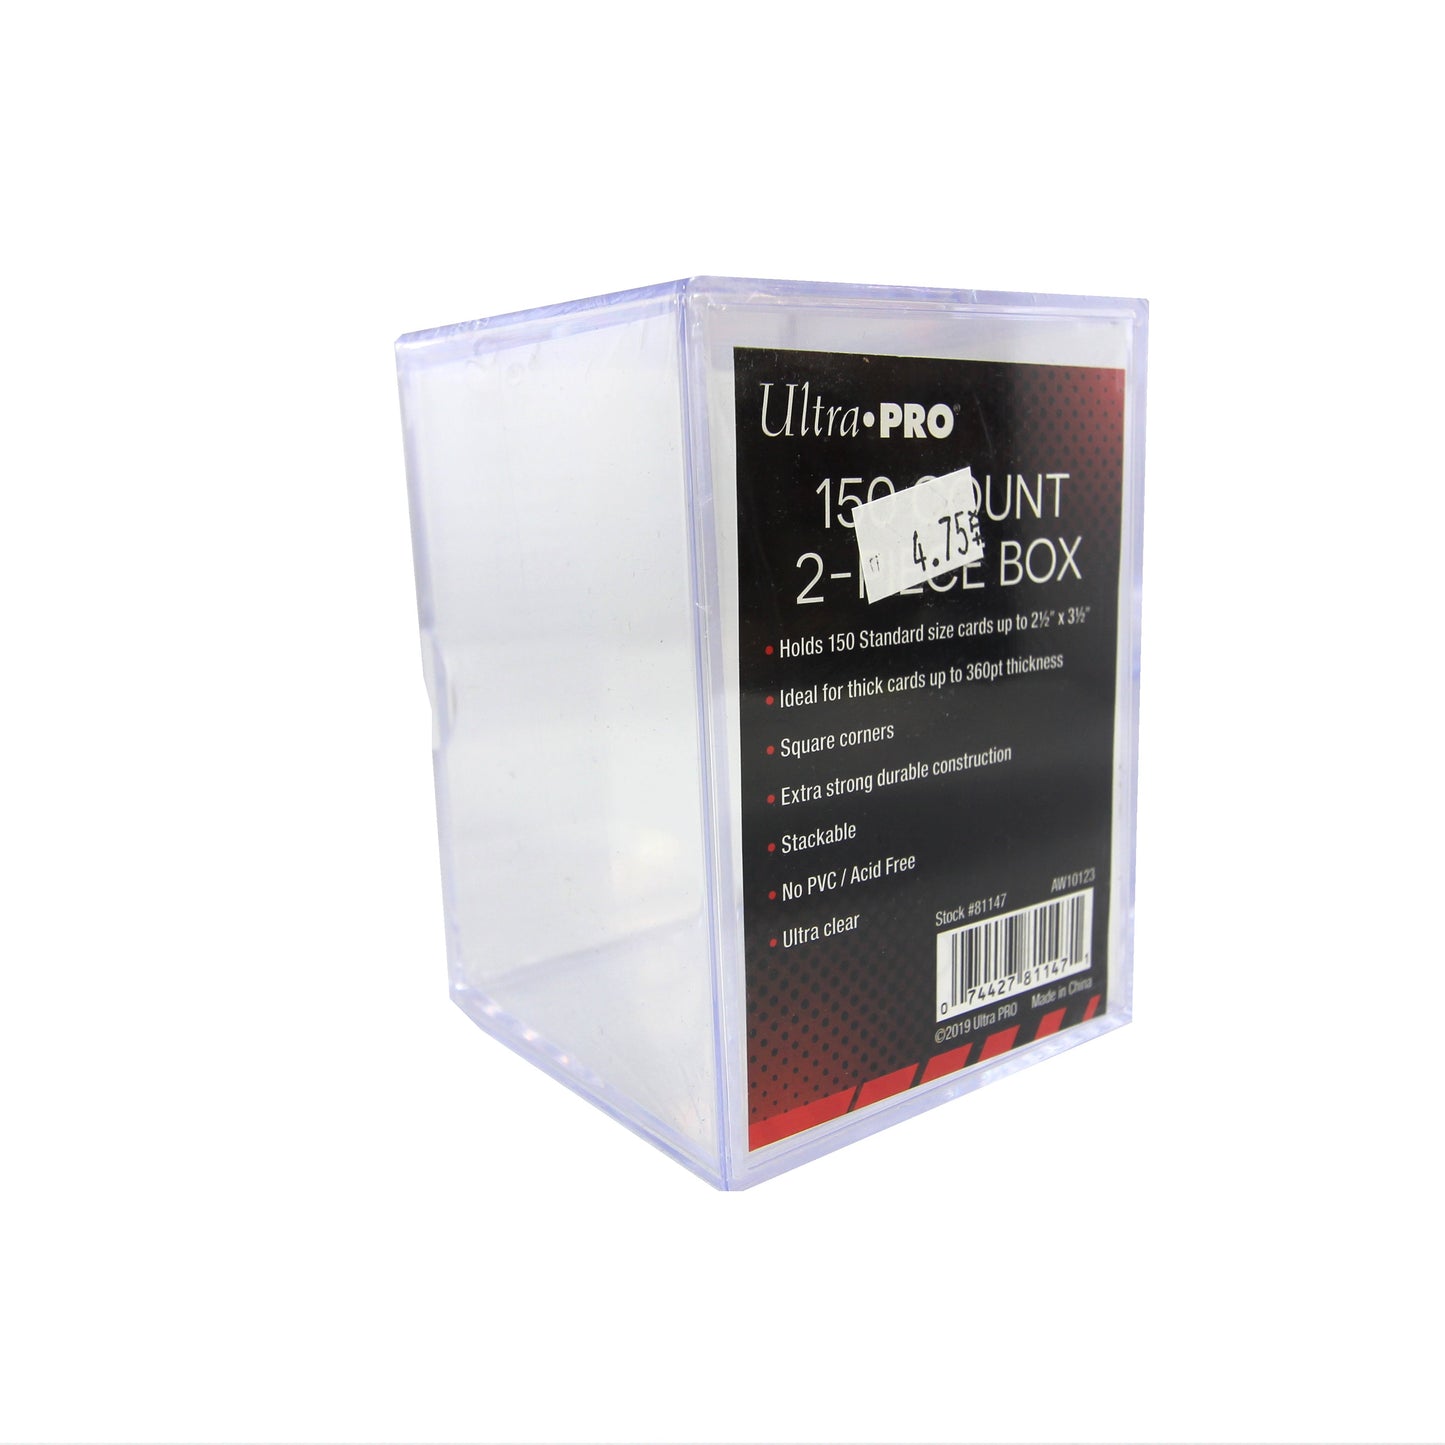 Ultra Pro 2-Piece Box - holds up to 150 cards